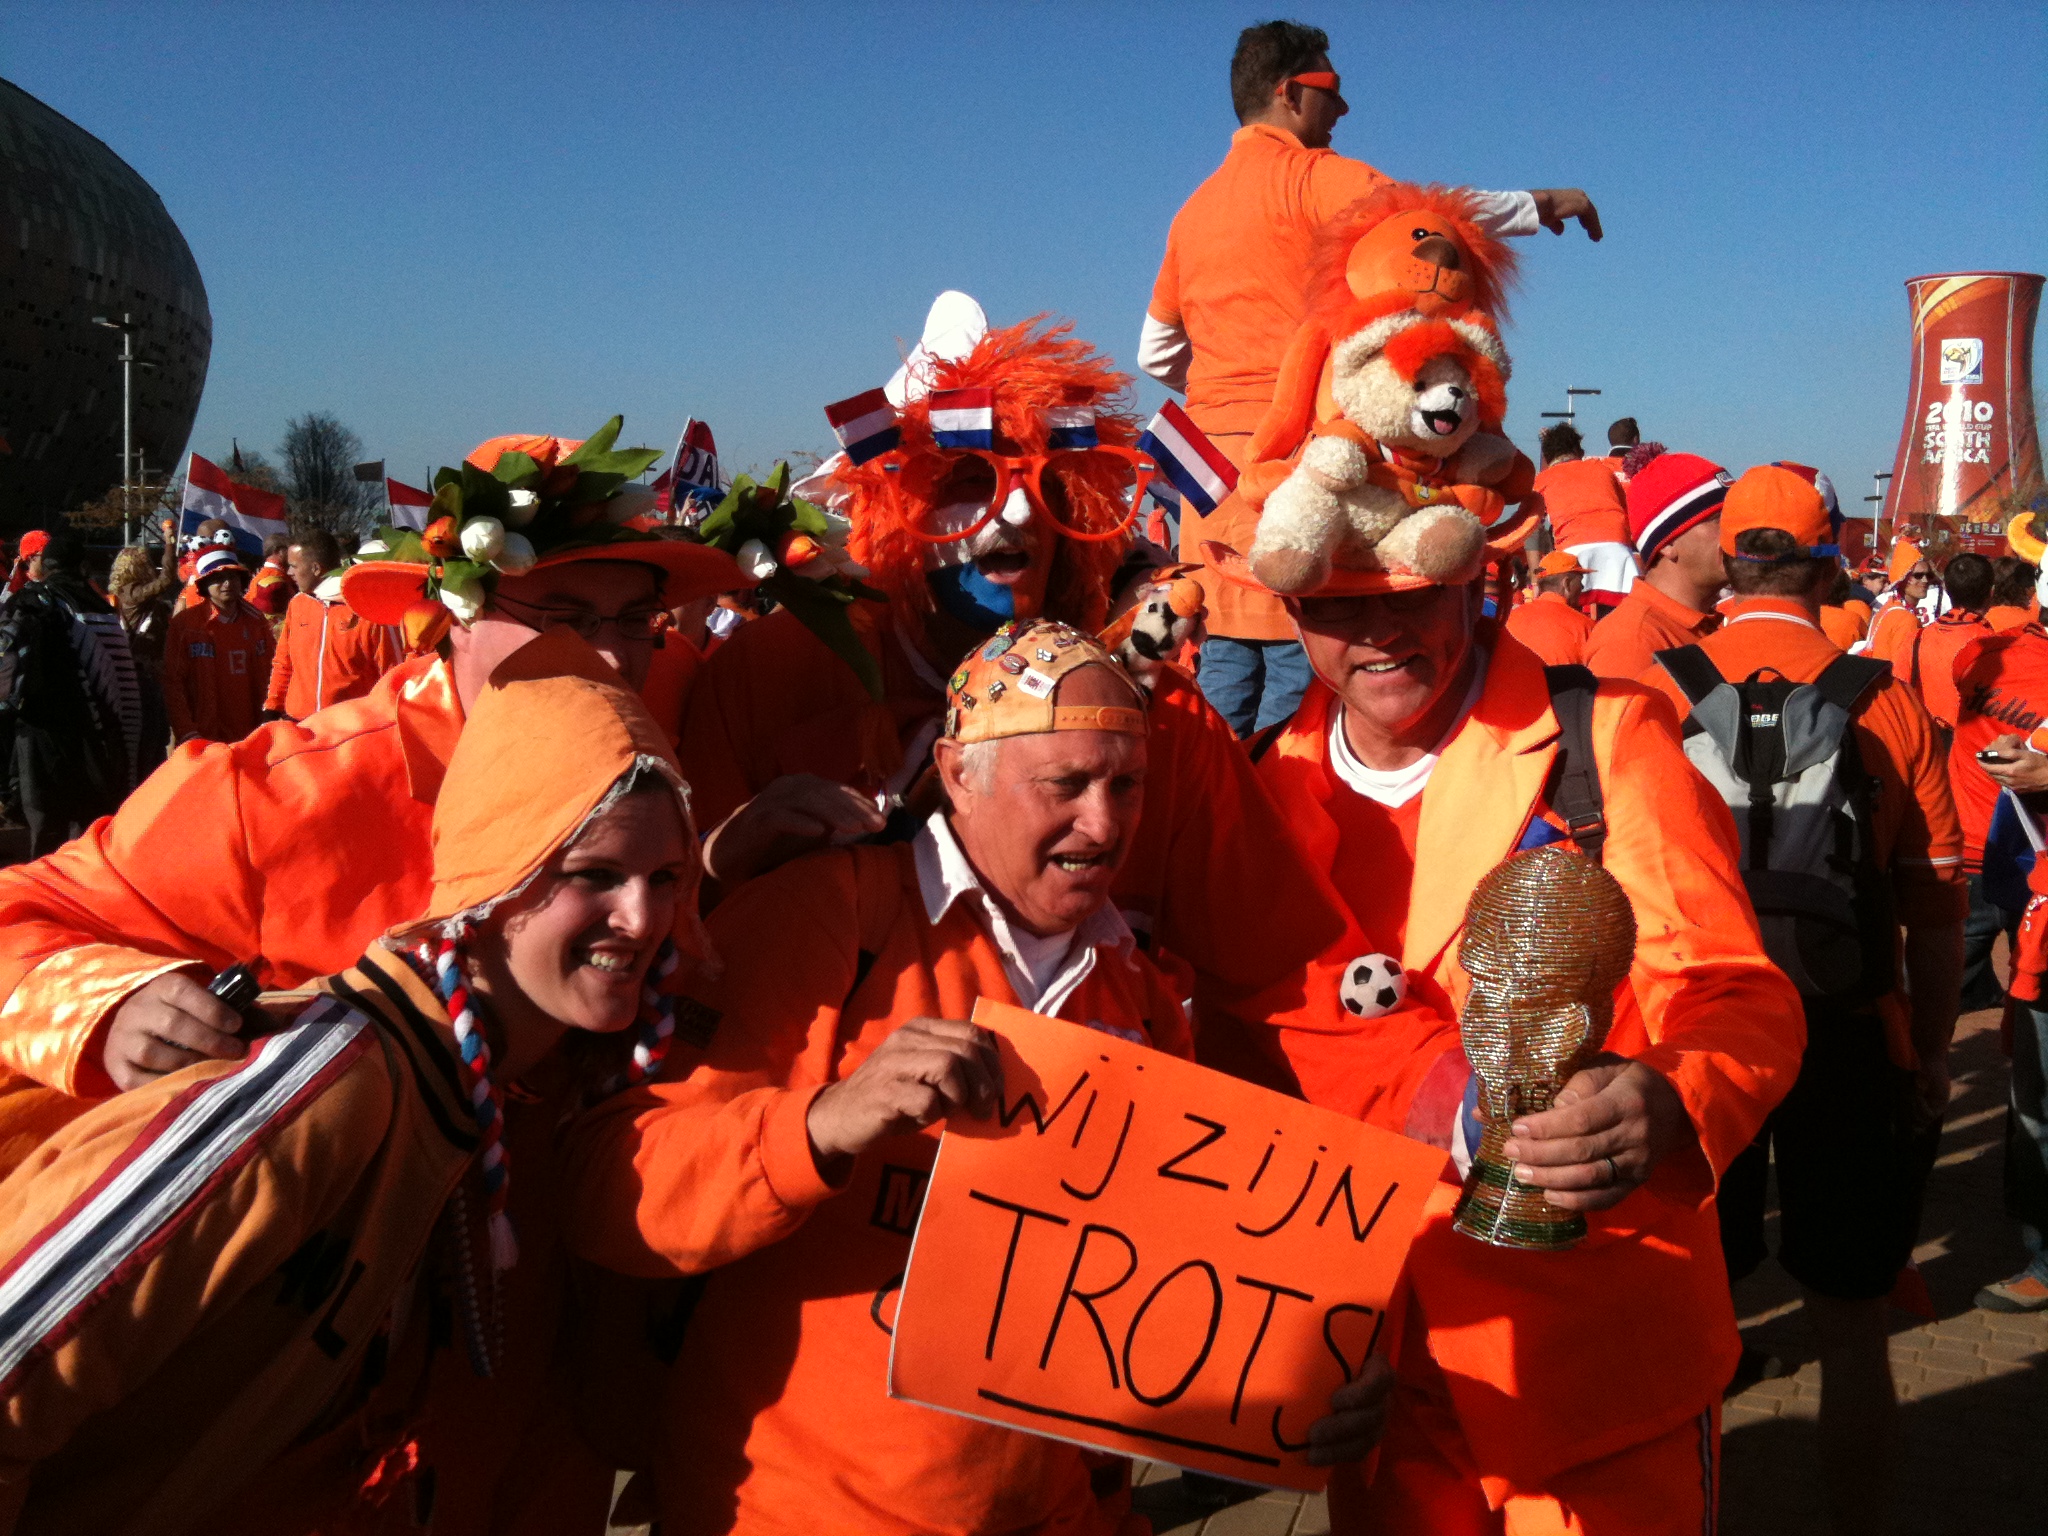 several people dressed in orange holding signs at an event